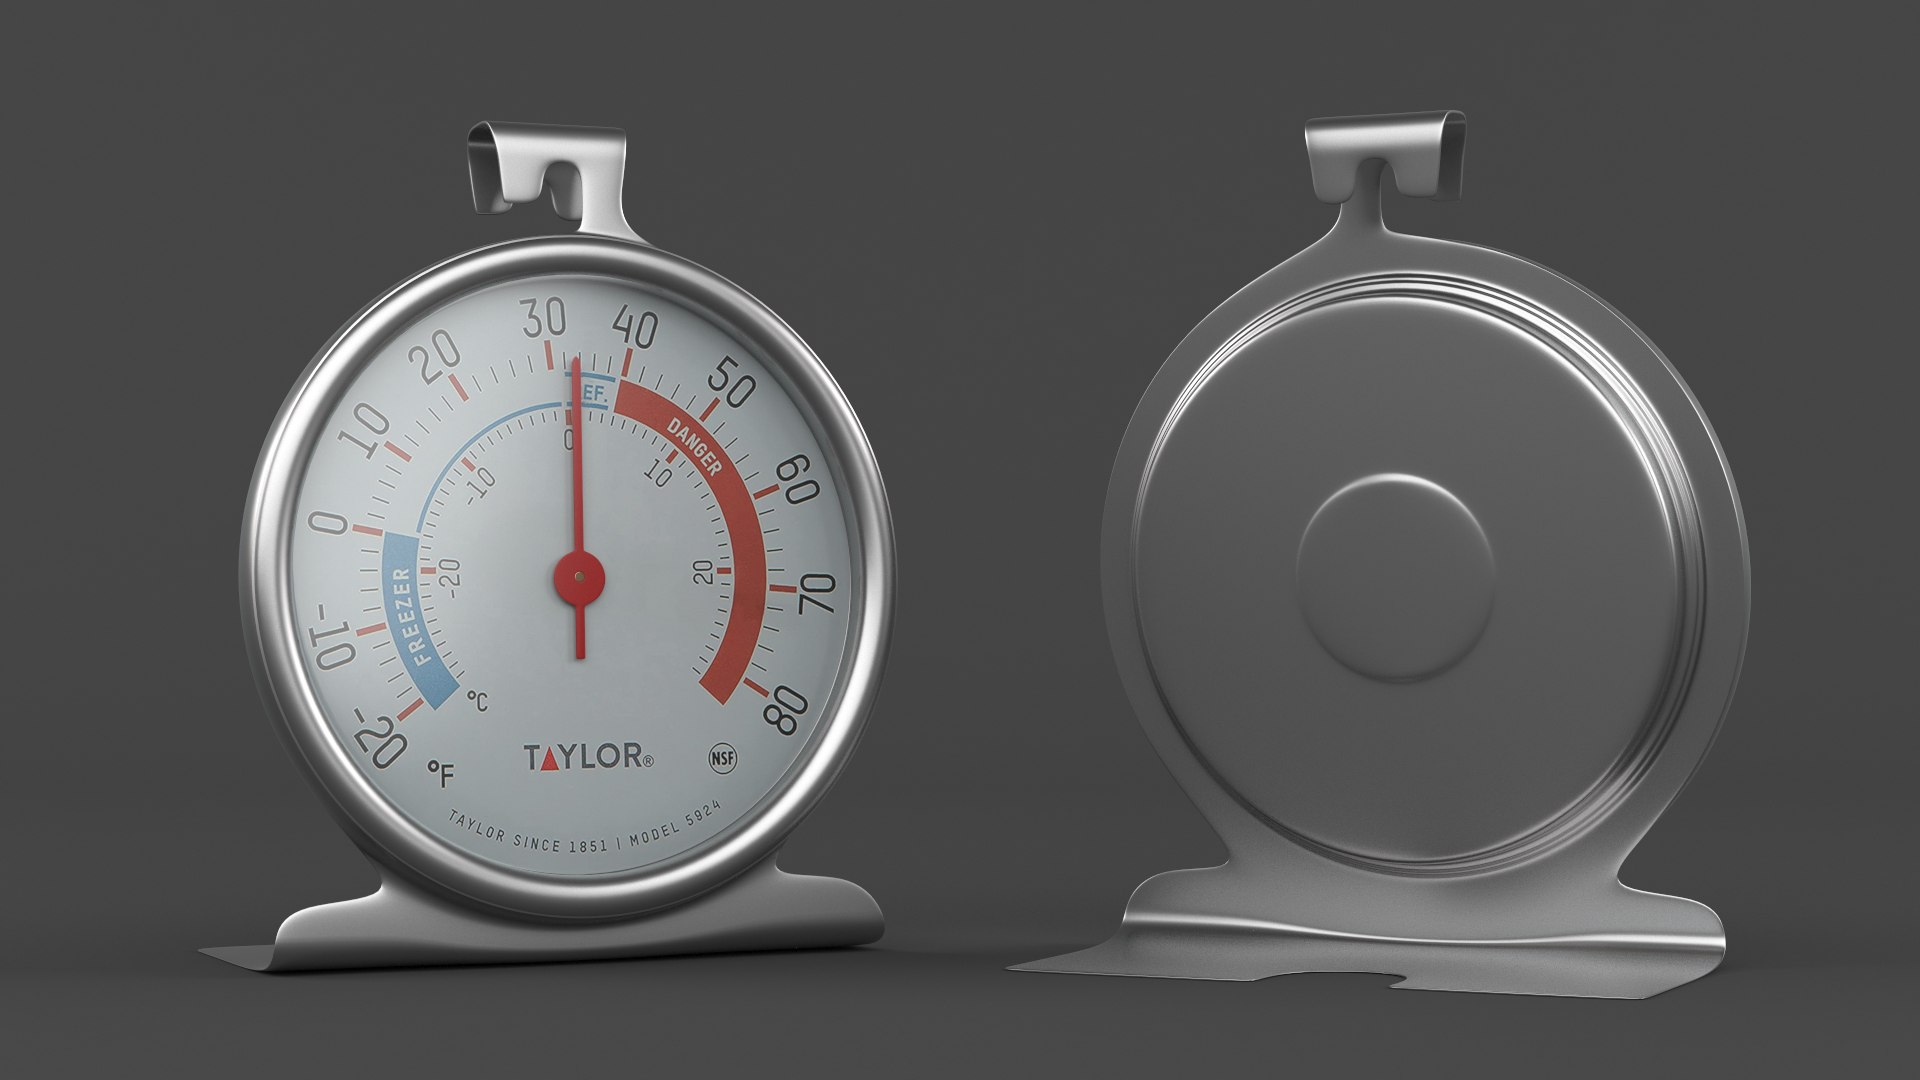 1,188 Stove Oven Thermometer Images, Stock Photos, 3D objects